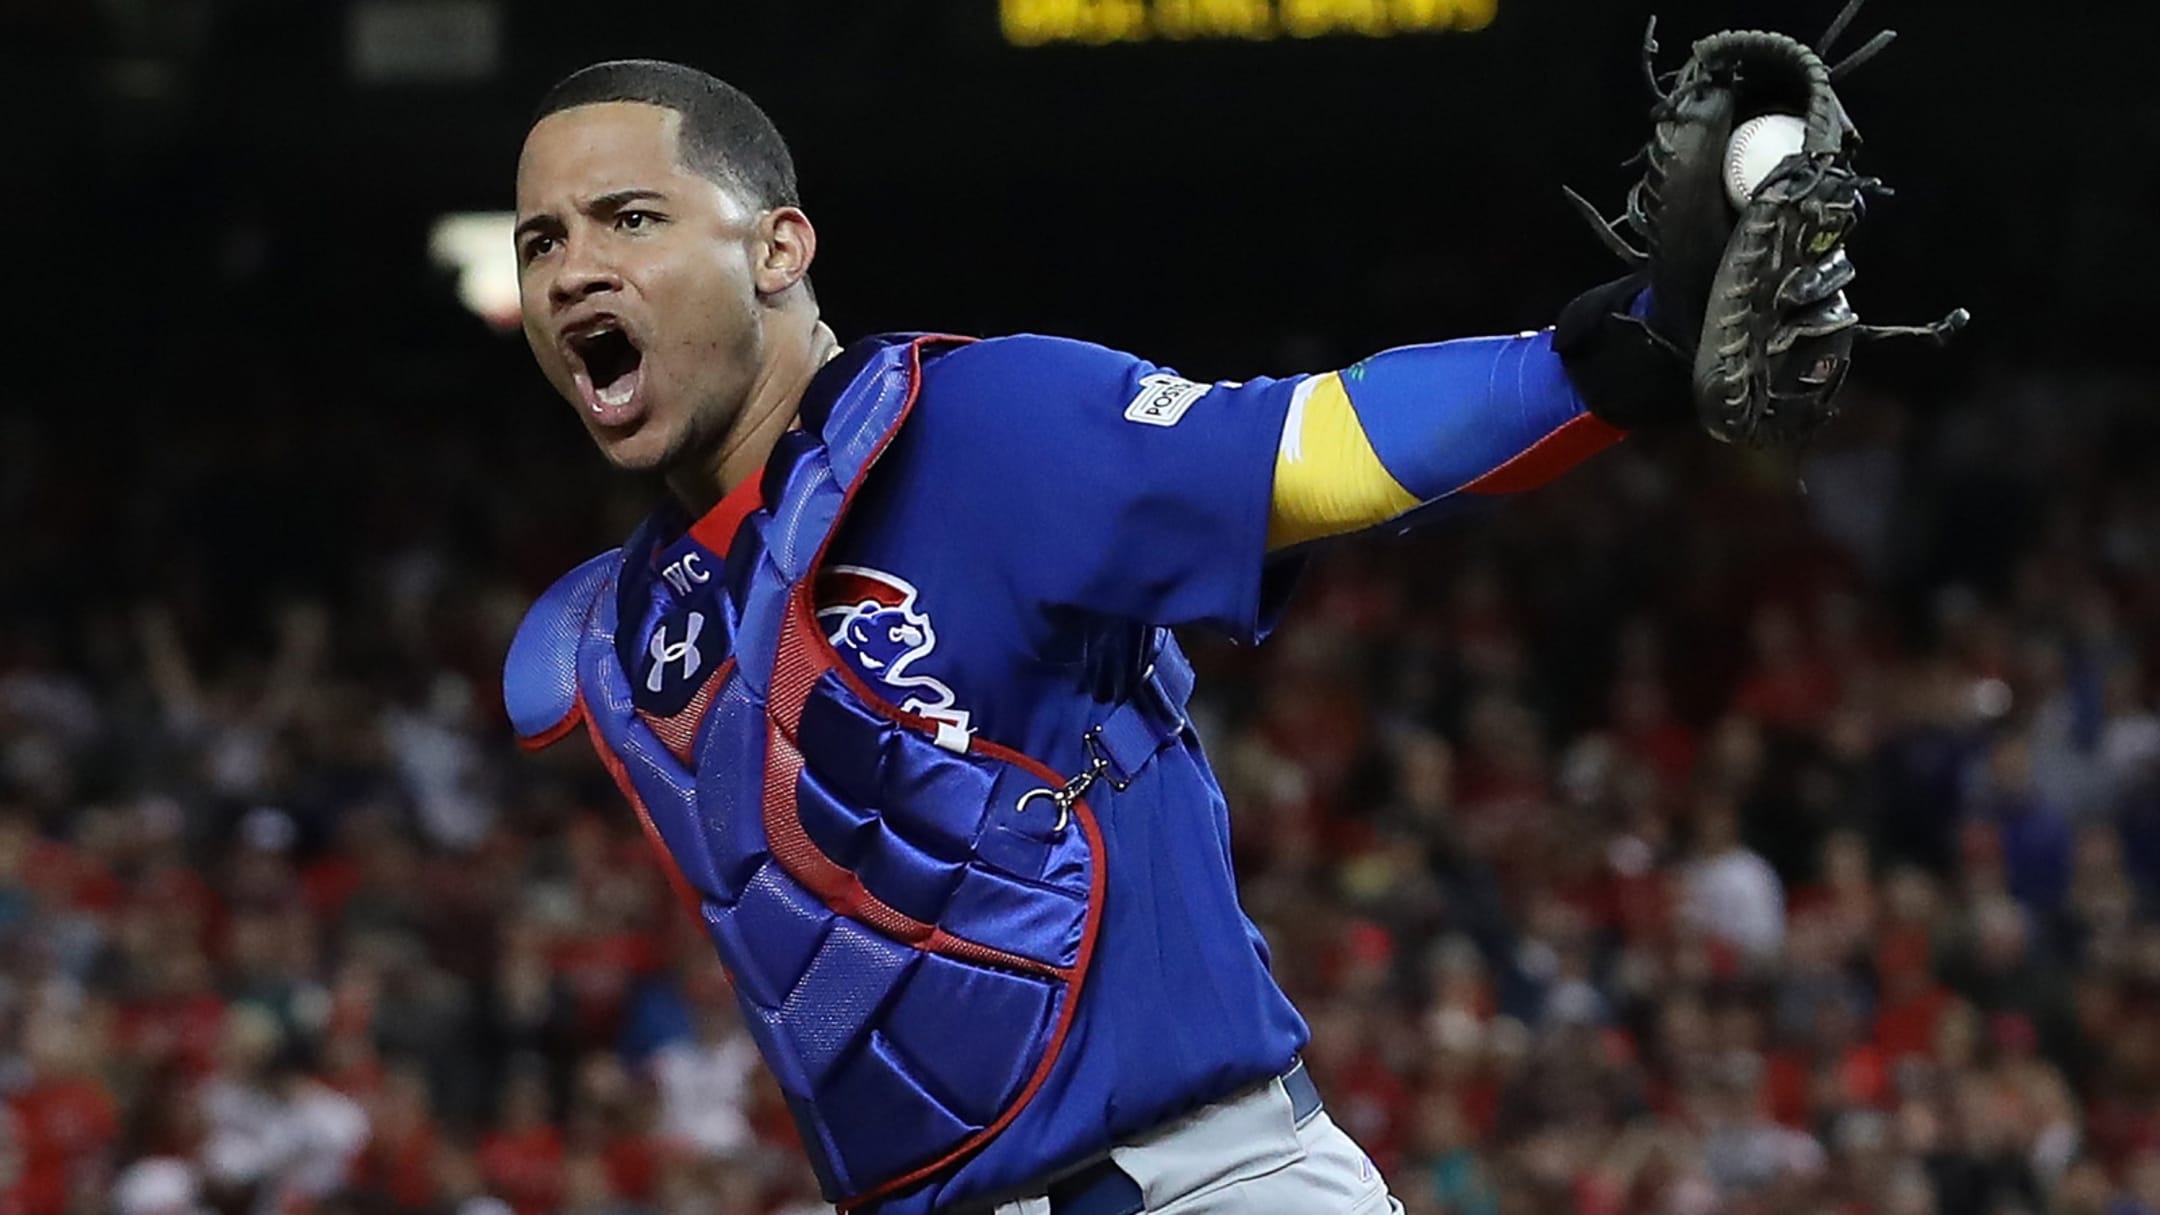 Kyle Schwarber defying odds, leads Cubs offense in Game 2 of World Series